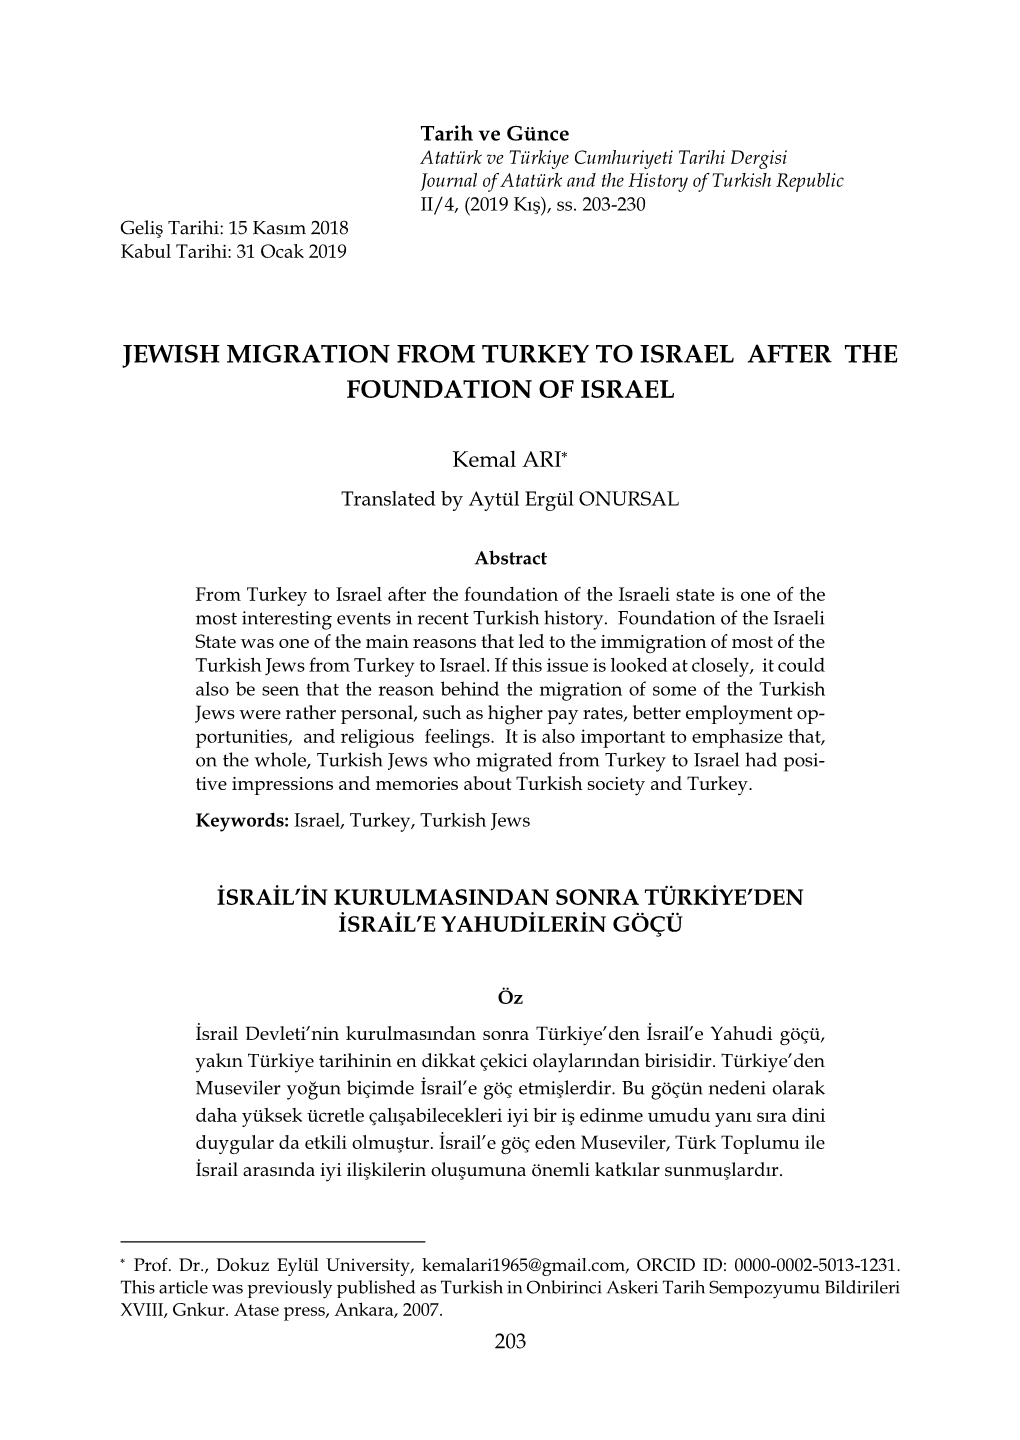 Jewish Migration from Turkey to Israel After the Foundation of Israel